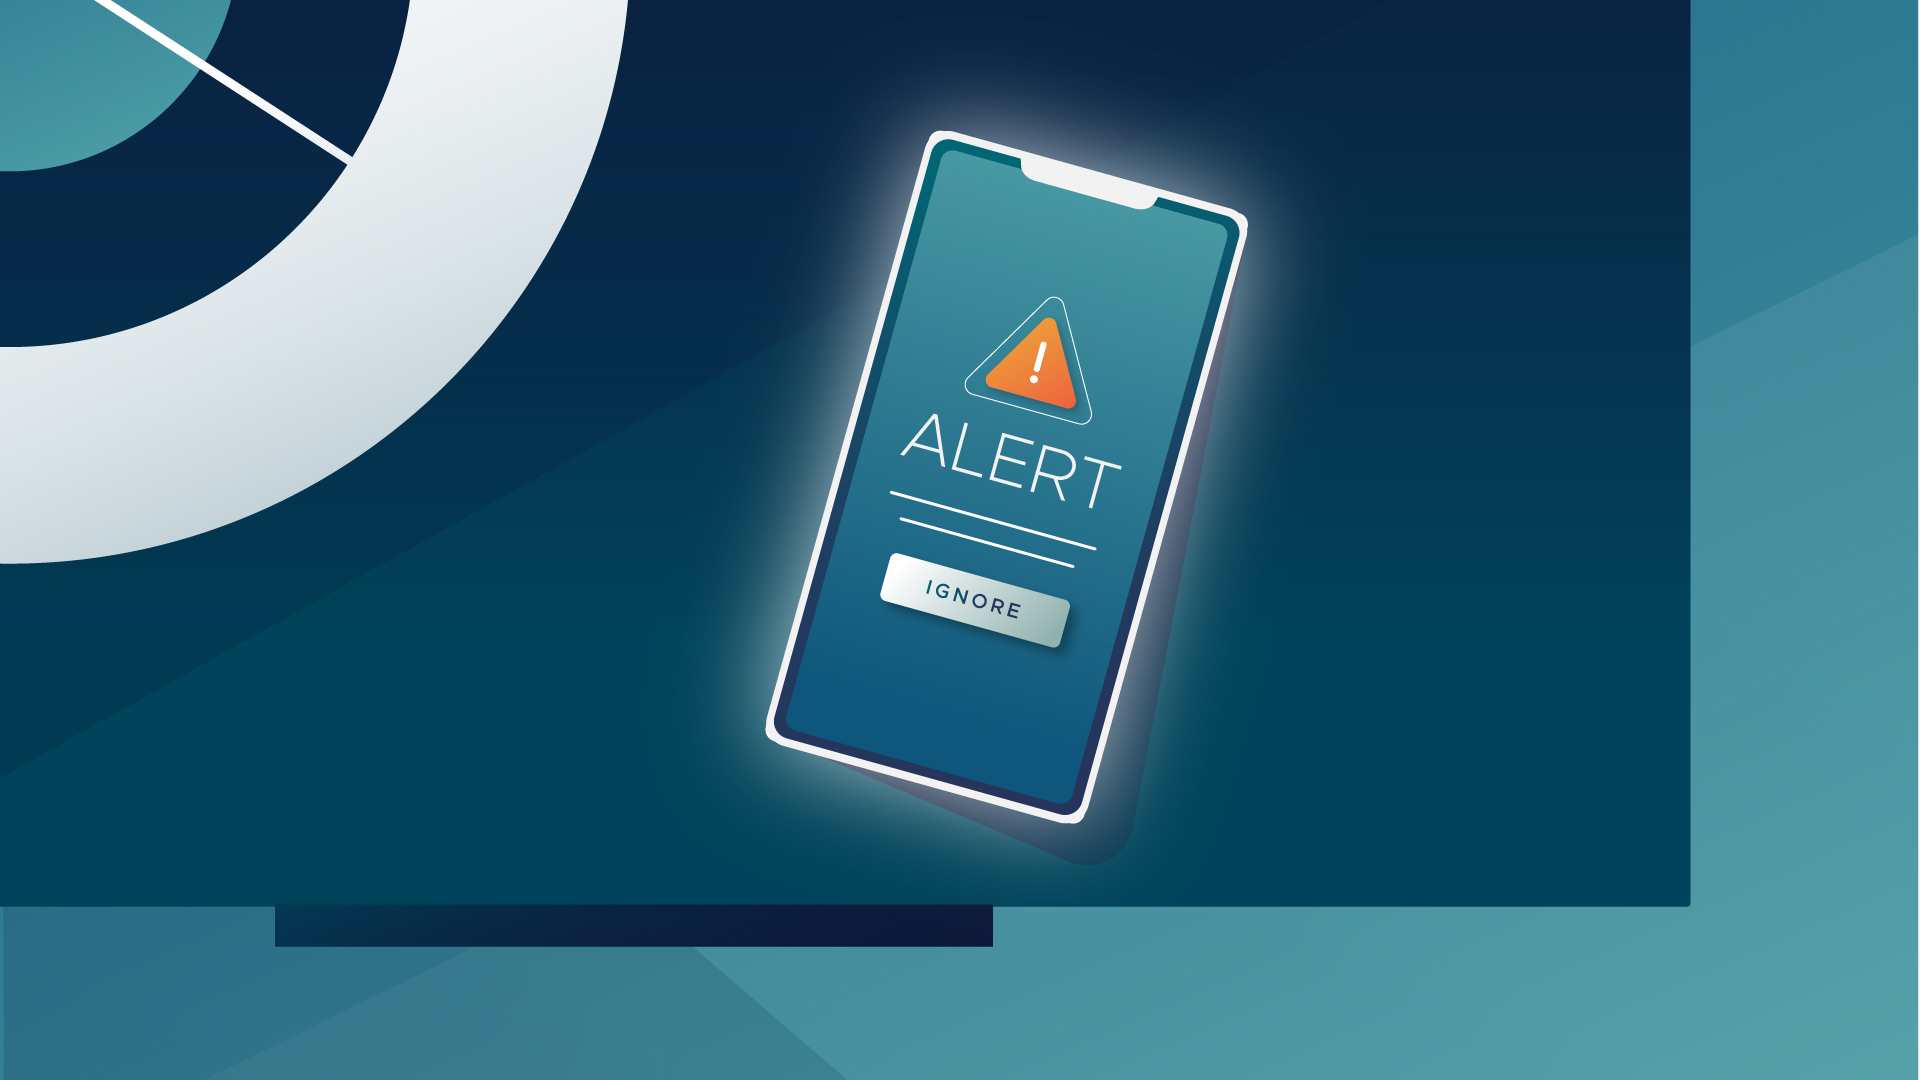 Illustration of a phone on a nightstand with the word Alert written on it.